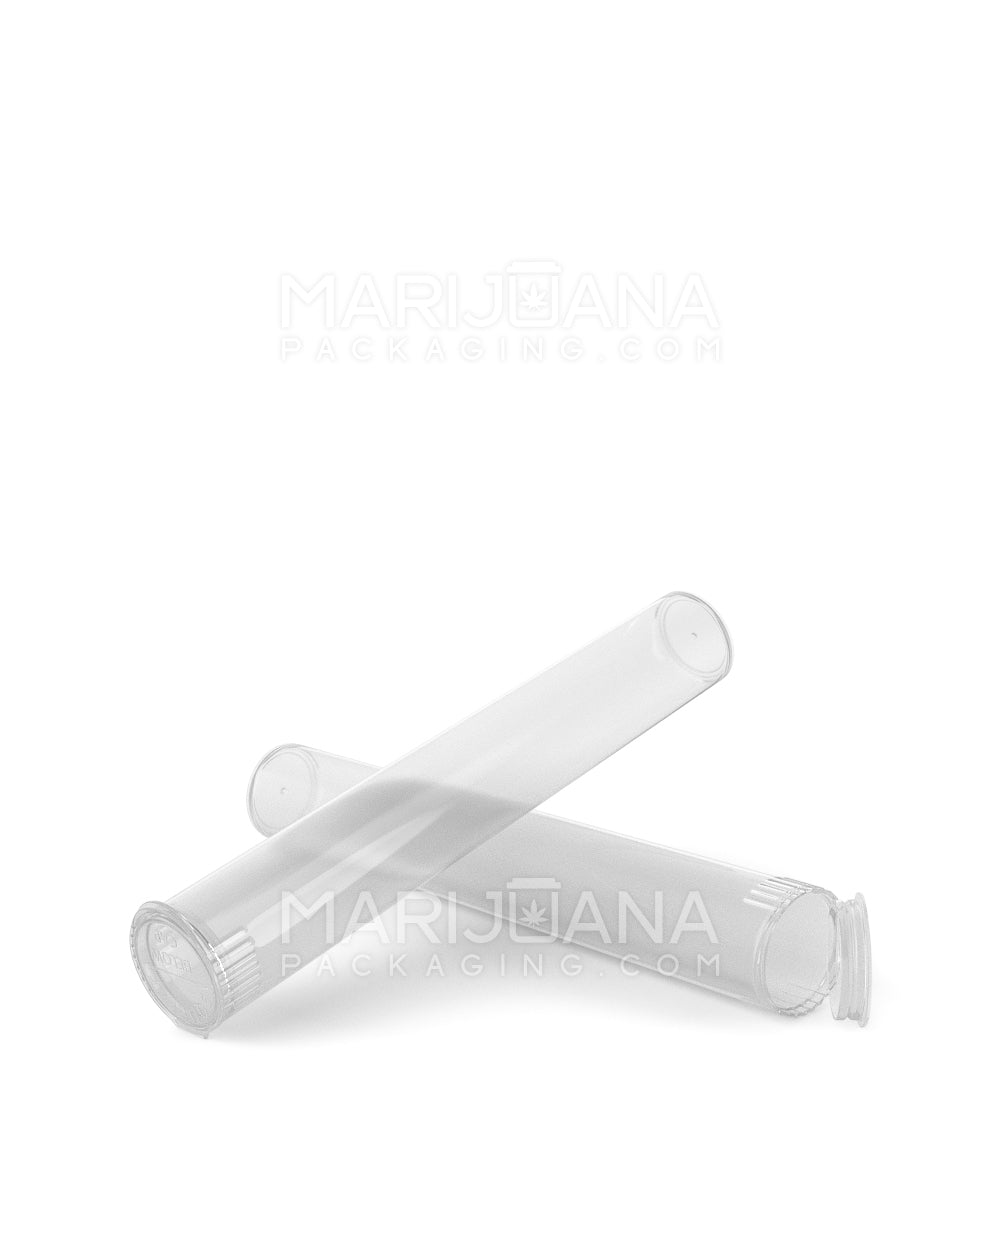 116mm Tech-line Pre-Roll Tube - Clear - Child Resistant Made in